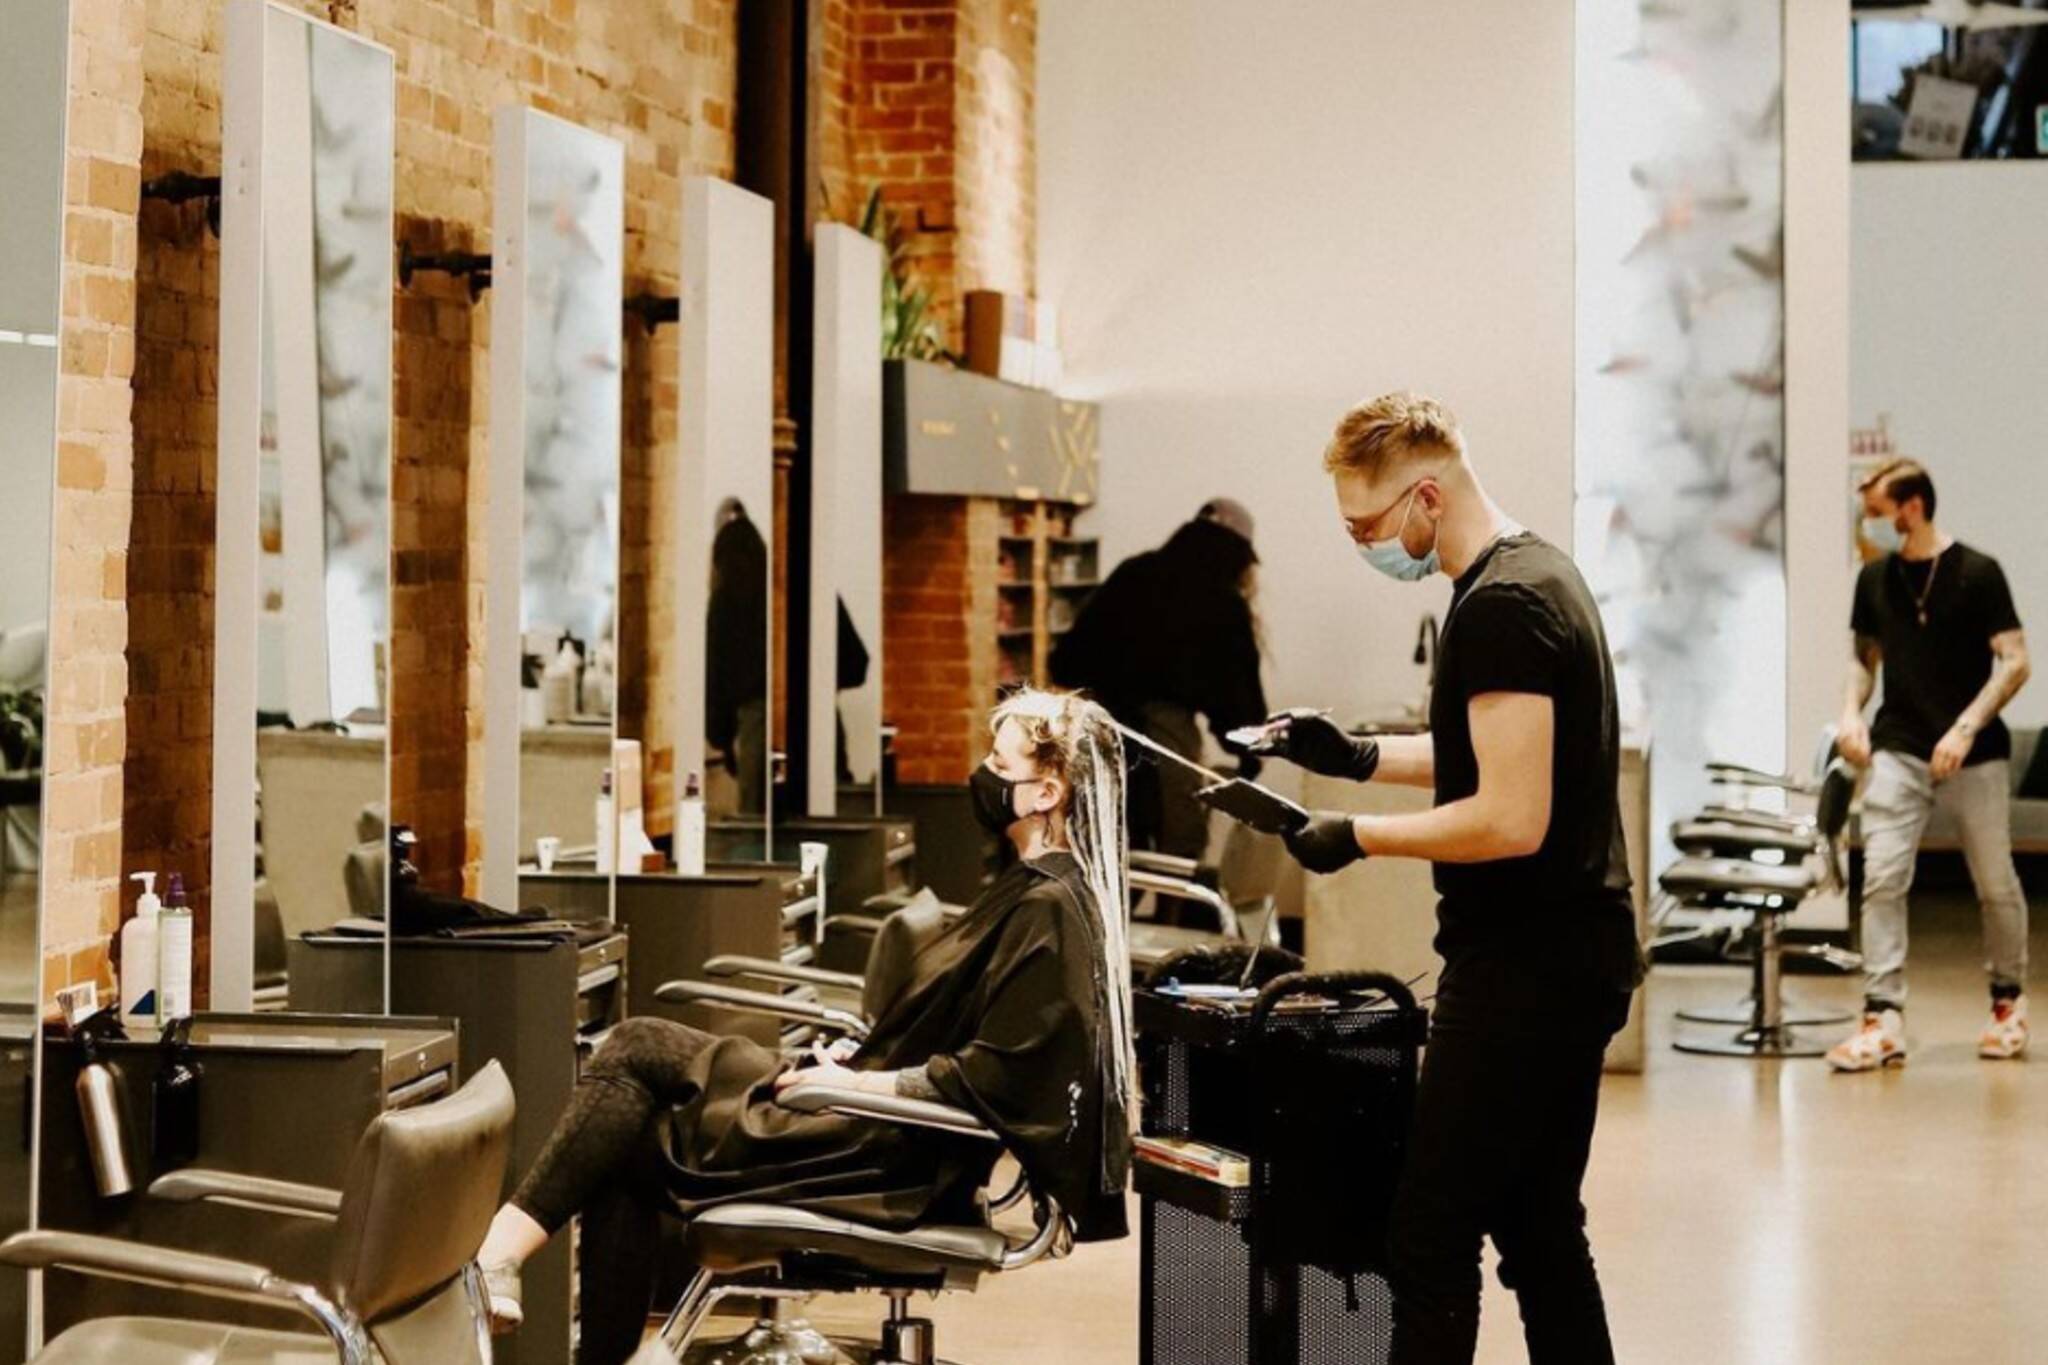 Toronto hair salons are bracing for another potential lockdown